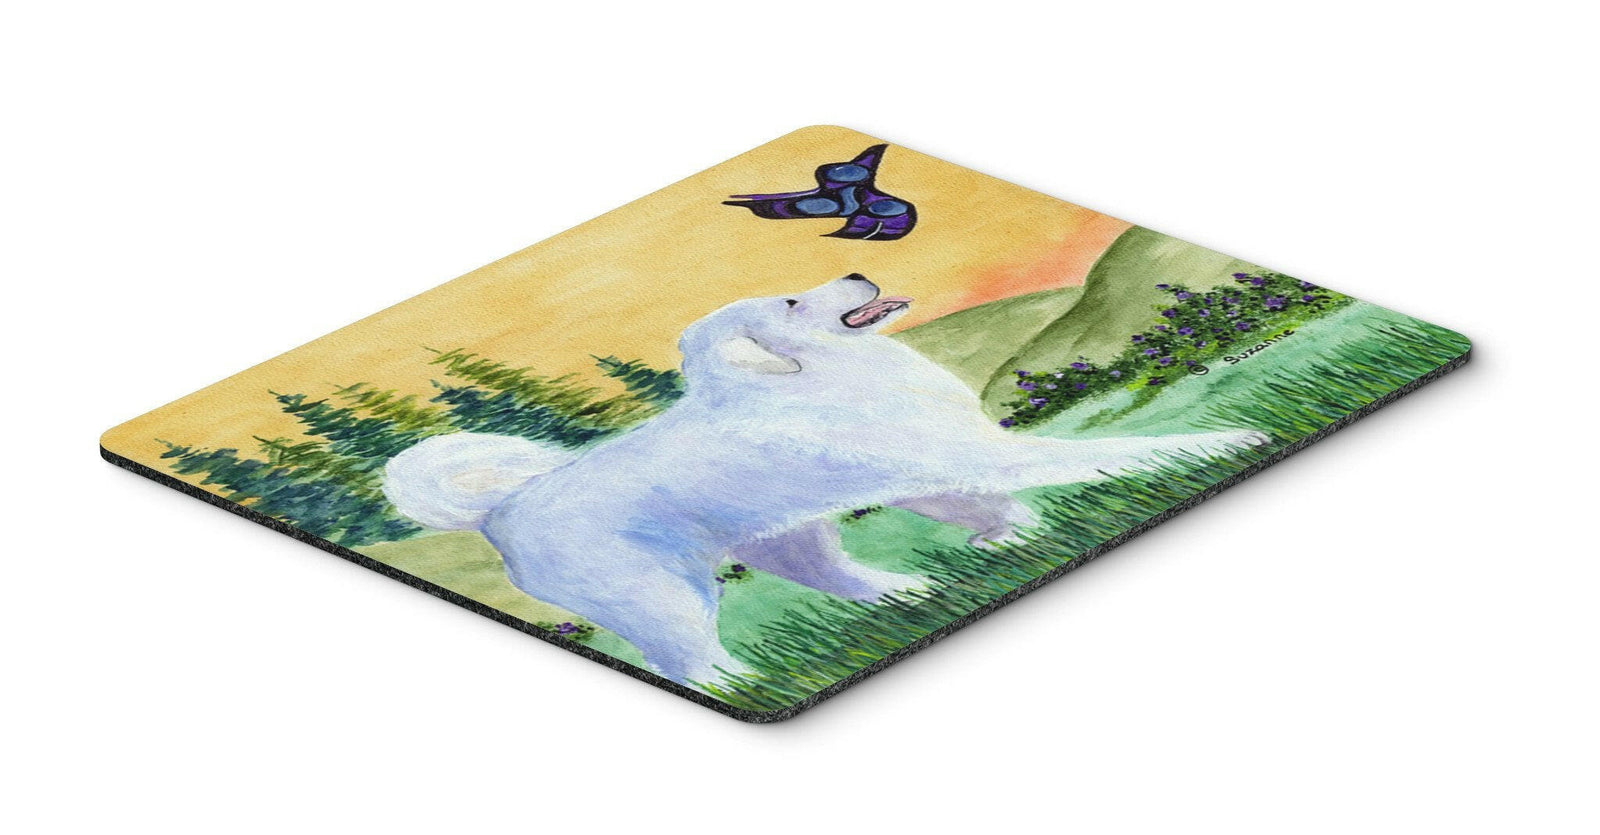 Great Pyrenees Mouse pad, hot pad, or trivet by Caroline's Treasures